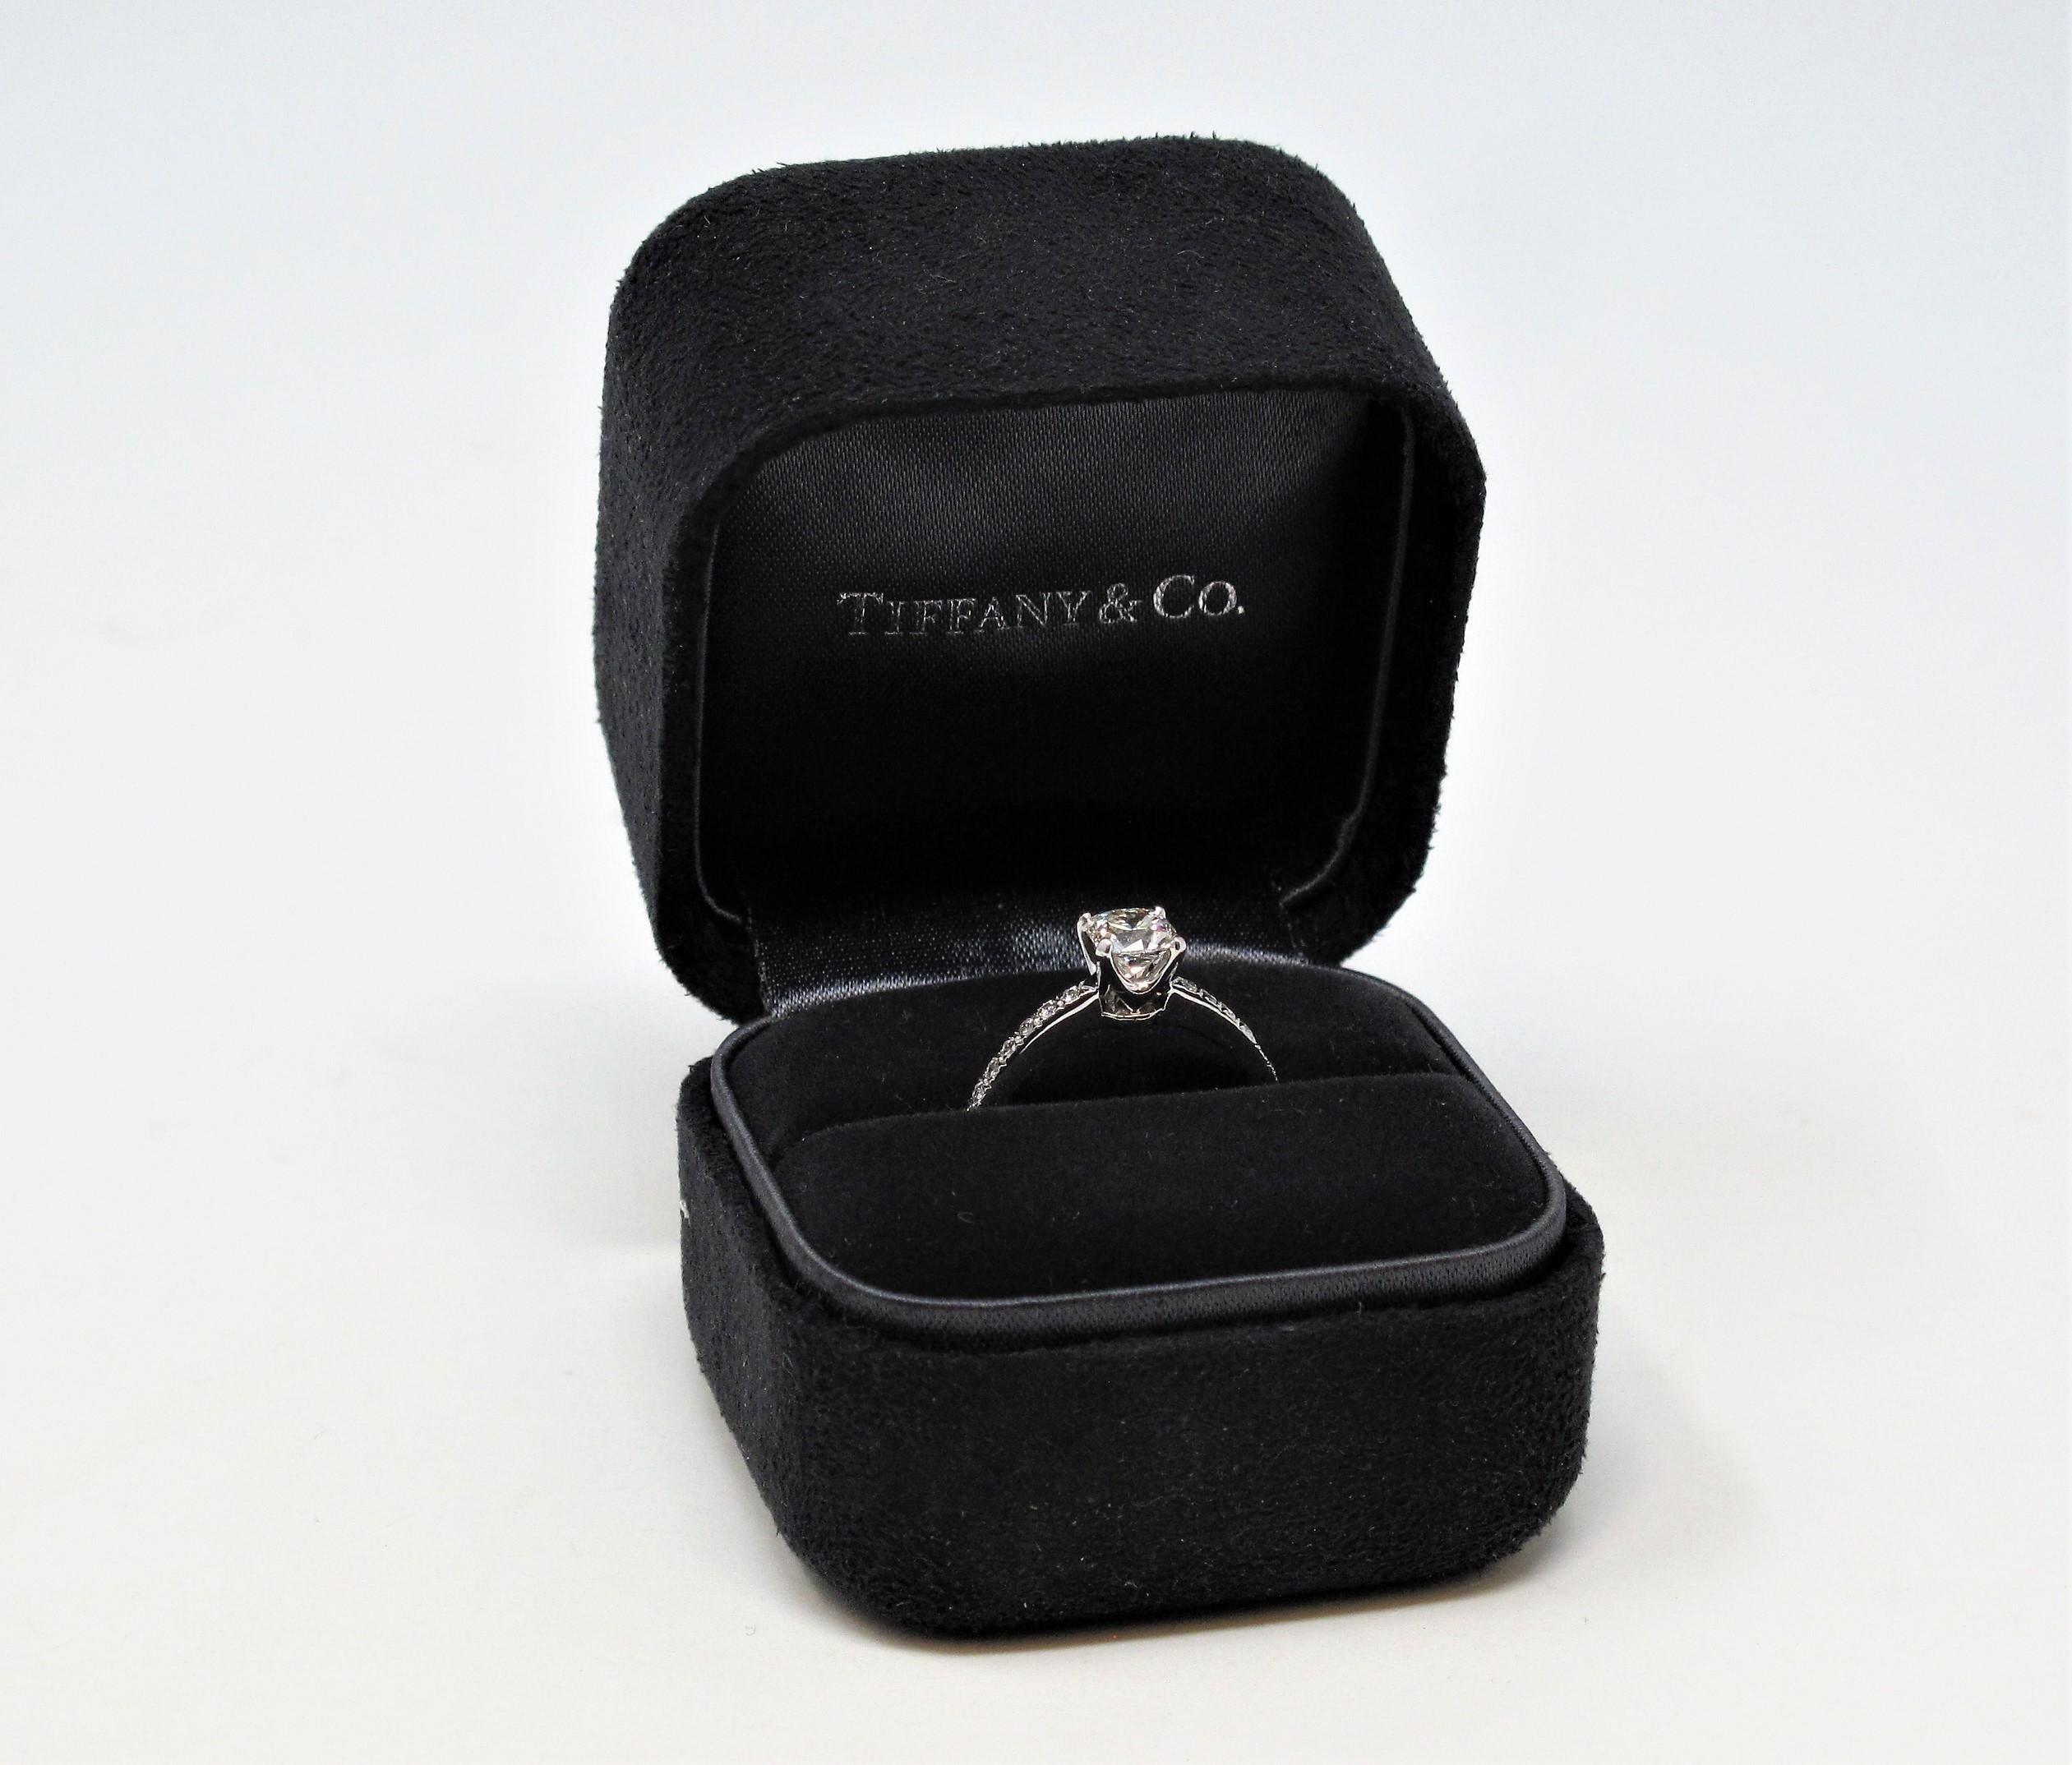 Say yes to this incredible diamond solitaire engagement ring from Tiffany & Co.! The classic style engagement ring gets a modernized update with this unique Lucida cut center diamond accented by a glittering pave diamond shank. Popping the question